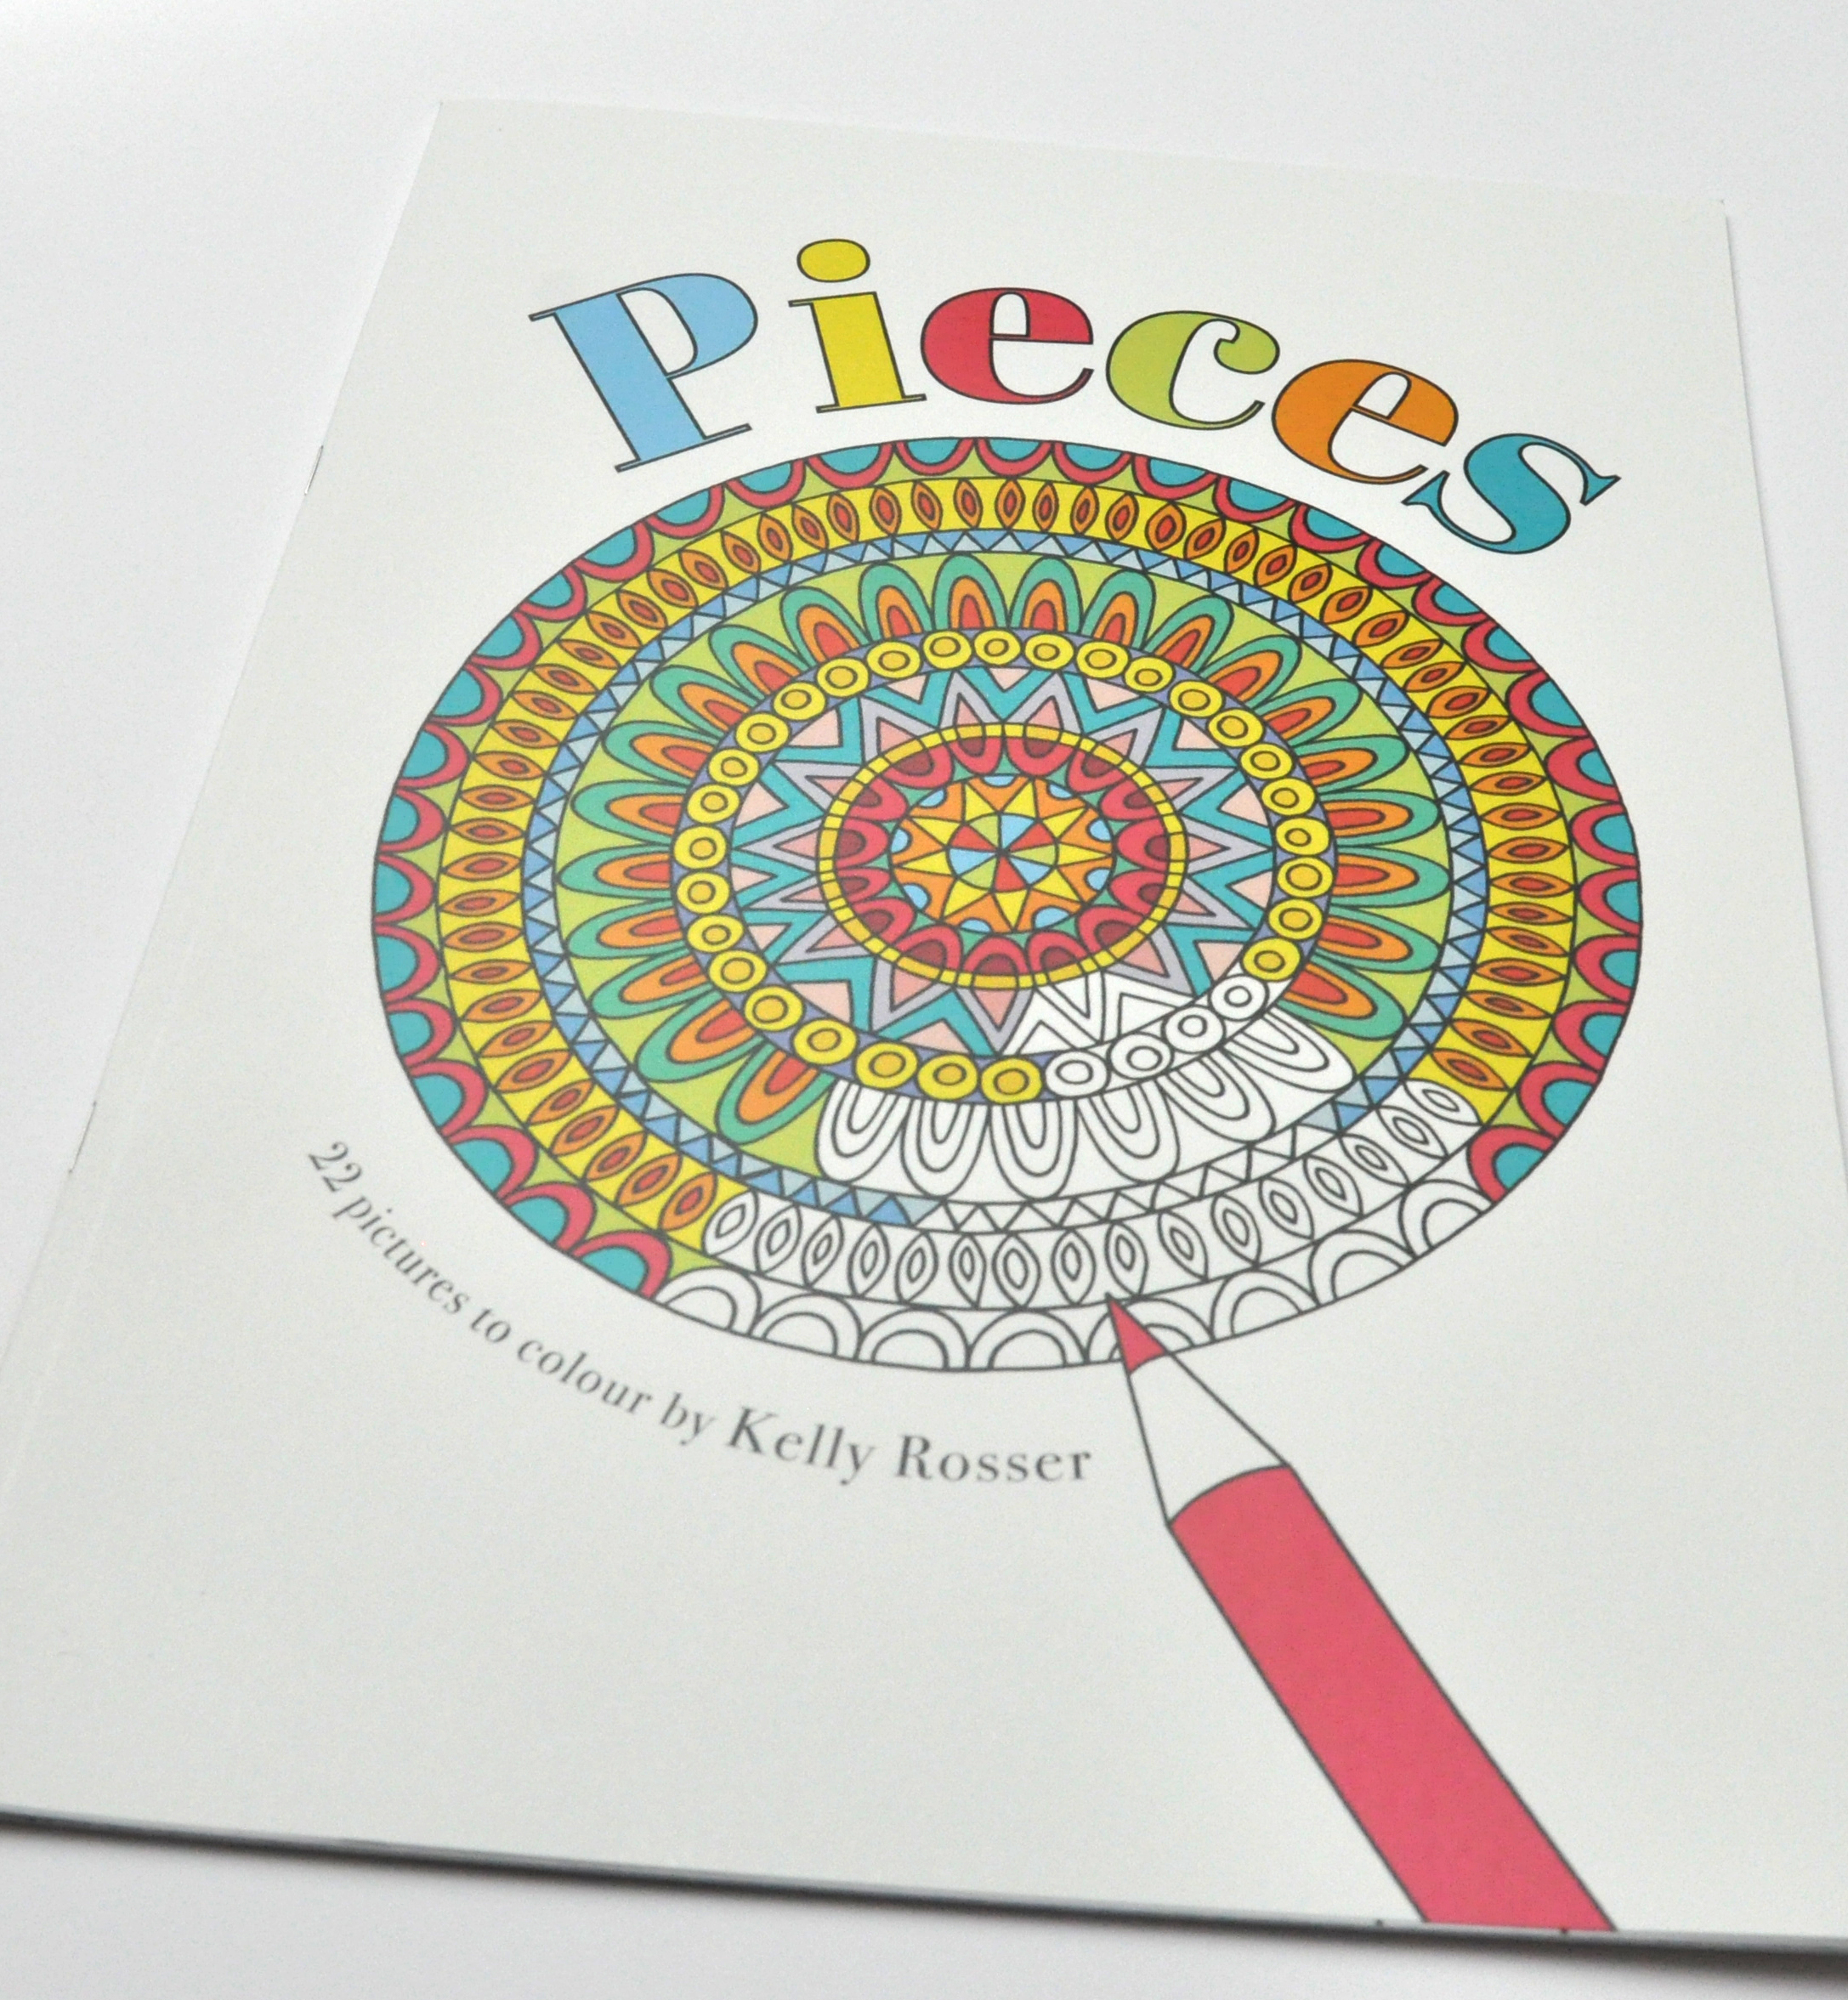 Download 'Pieces' Colouring Book with free p&p - 22 hand drawn ...